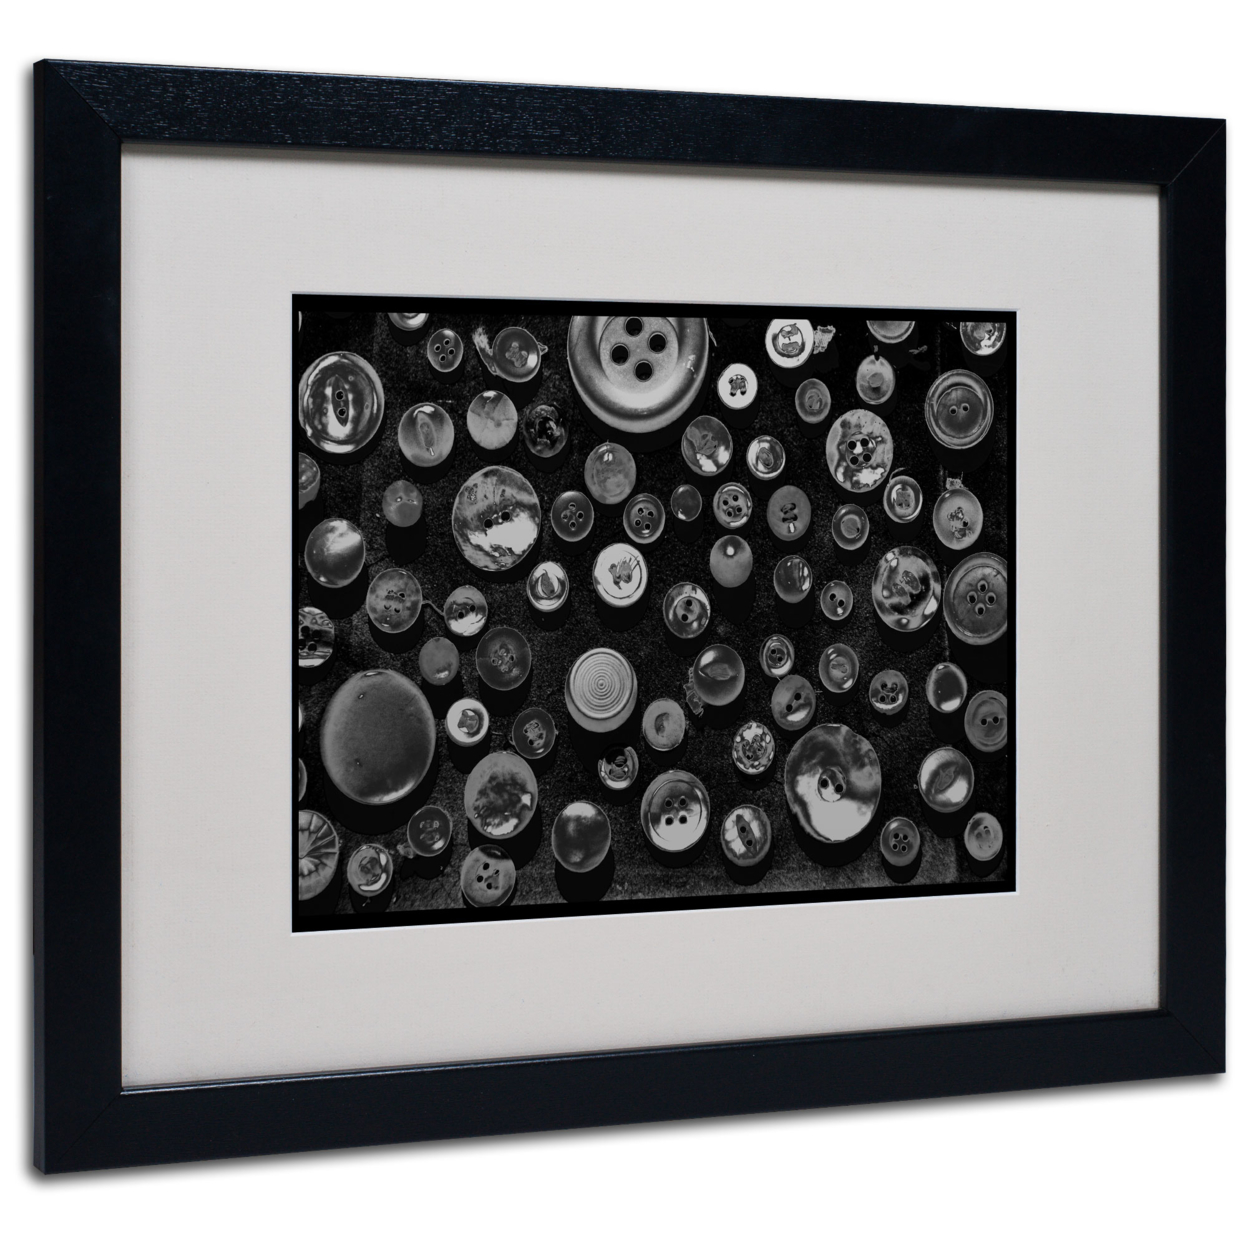 Patty Tuggle 'Black & White Buttons' Black Wooden Framed Art 18 X 22 Inches